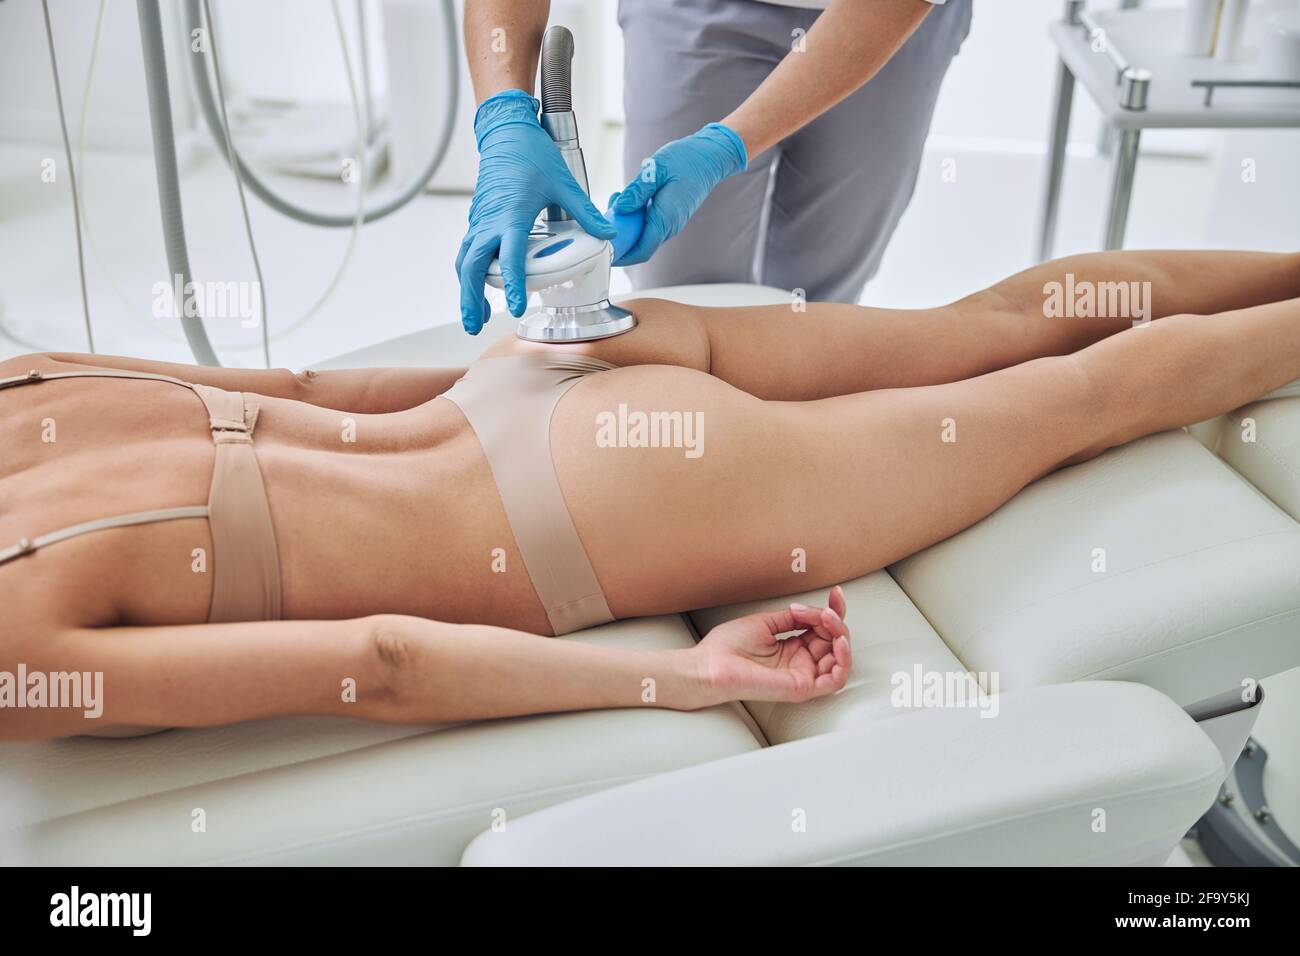 Image of ultrasound cavitation body contouring treatment in wellness center Stock Photo